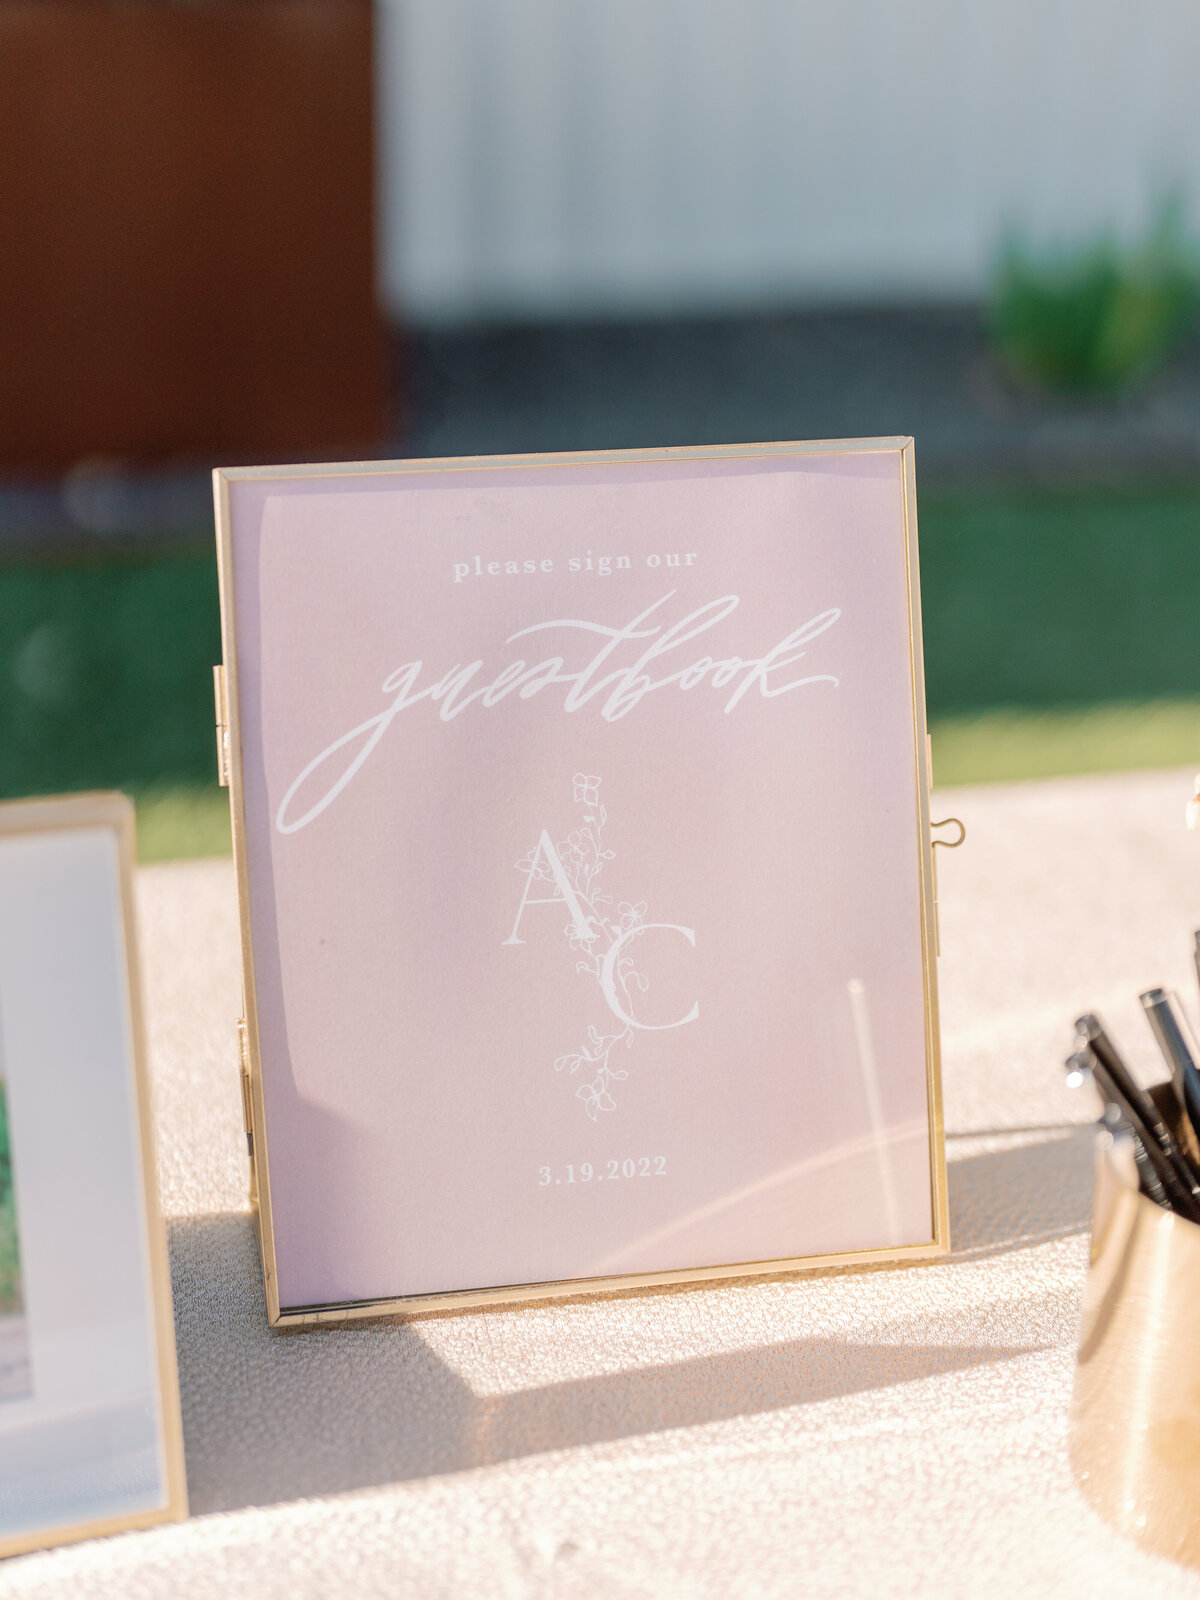 LBV Design House Wedding Design Planning Day-Of Signage Paper Goods Shoppable Accessories Wedding Day Austin, Texas beyond Valerie Strenk Lettered by Valerie Hand Lettering15